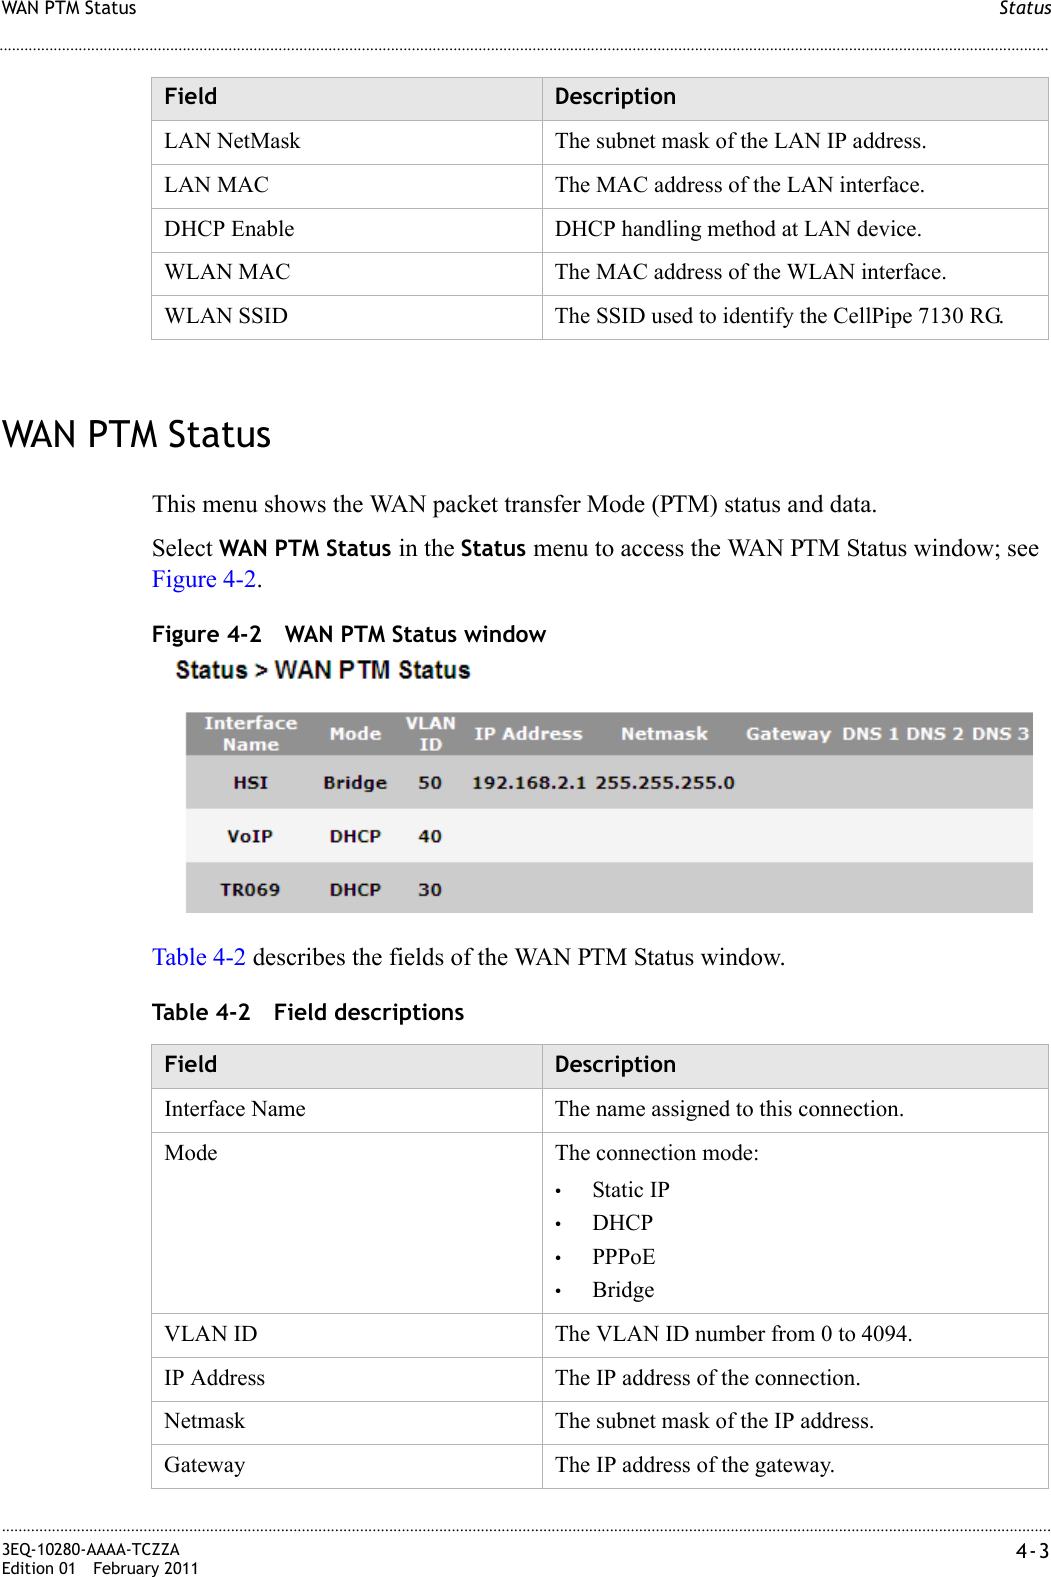 StatusWAN PTM Status............................................................................................................................................................................................................................................................3EQ-10280-AAAA-TCZZAEdition 01 February 2011 4-3............................................................................................................................................................................................................................................................WAN PTM StatusThis menu shows the WAN packet transfer Mode (PTM) status and data.Select WAN PTM Status in the Status menu to access the WAN PTM Status window; see Figure 4-2.Figure 4-2 WAN PTM Status windowTable 4-2 describes the fields of the WAN PTM Status window.Table 4-2 Field descriptionsLAN NetMask The subnet mask of the LAN IP address.LAN MAC The MAC address of the LAN interface.DHCP Enable DHCP handling method at LAN device.WLAN MAC The MAC address of the WLAN interface.WLAN SSID The SSID used to identify the CellPipe 7130 RG.Field DescriptionField DescriptionInterface Name The name assigned to this connection.Mode The connection mode: •Static IP•DHCP•PPPoE•BridgeVLAN ID The VLAN ID number from 0 to 4094.IP Address The IP address of the connection.Netmask The subnet mask of the IP address.Gateway The IP address of the gateway.